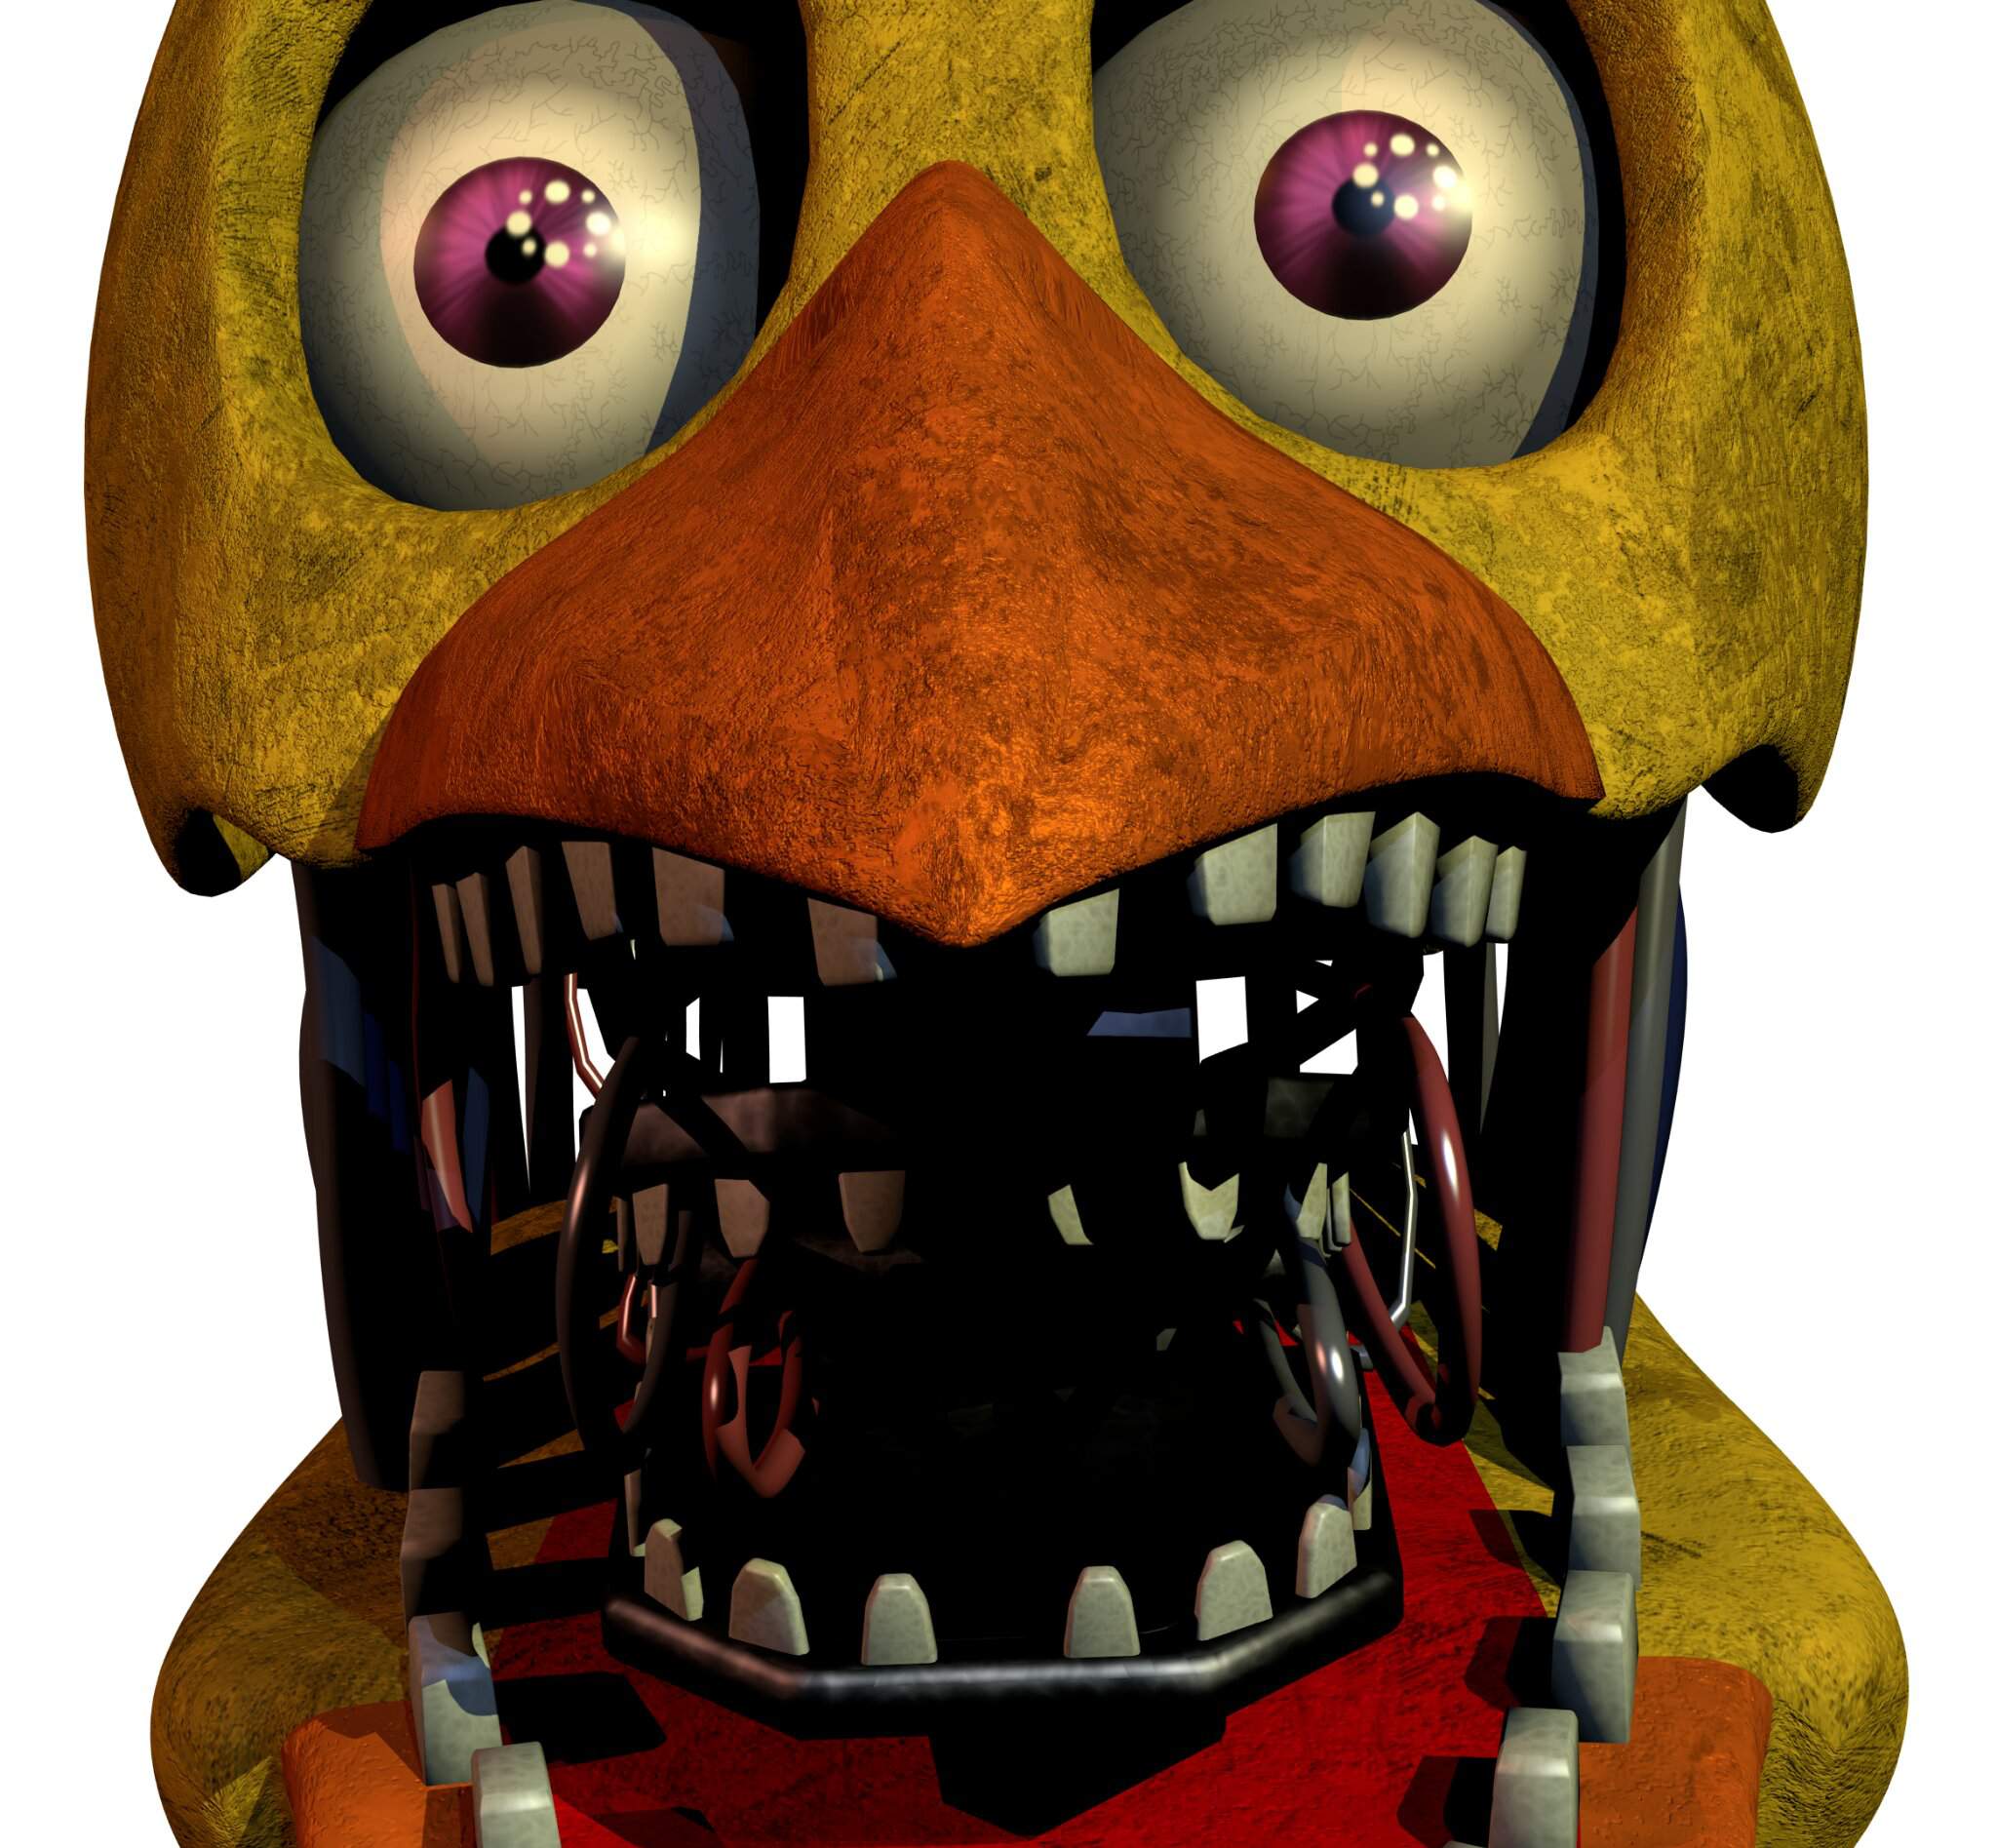 Withered chica is trying, okay? 